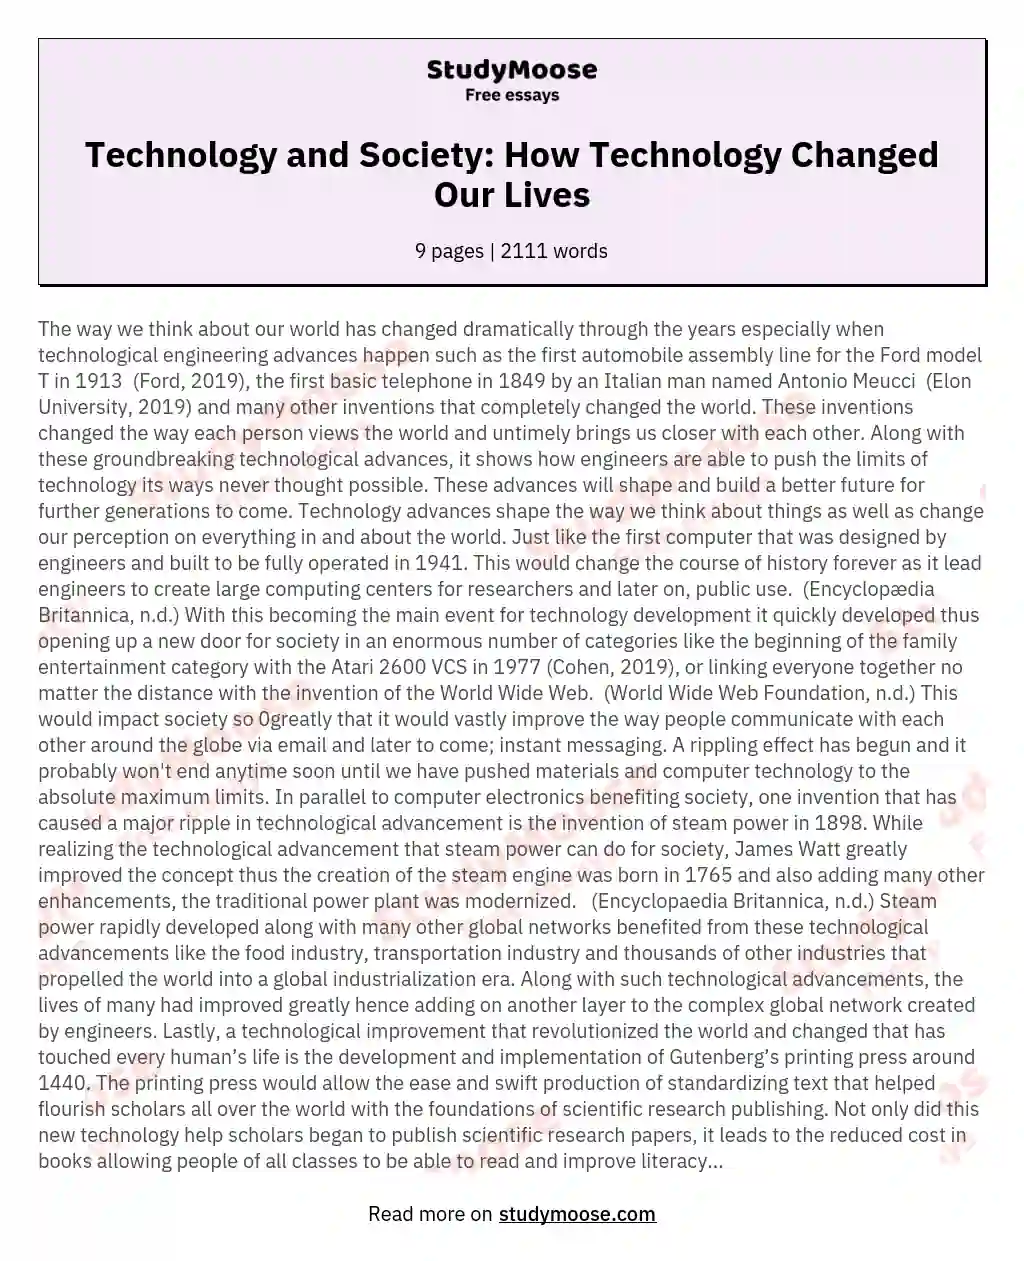 Technology and Society: How Technology Changed Our Lives